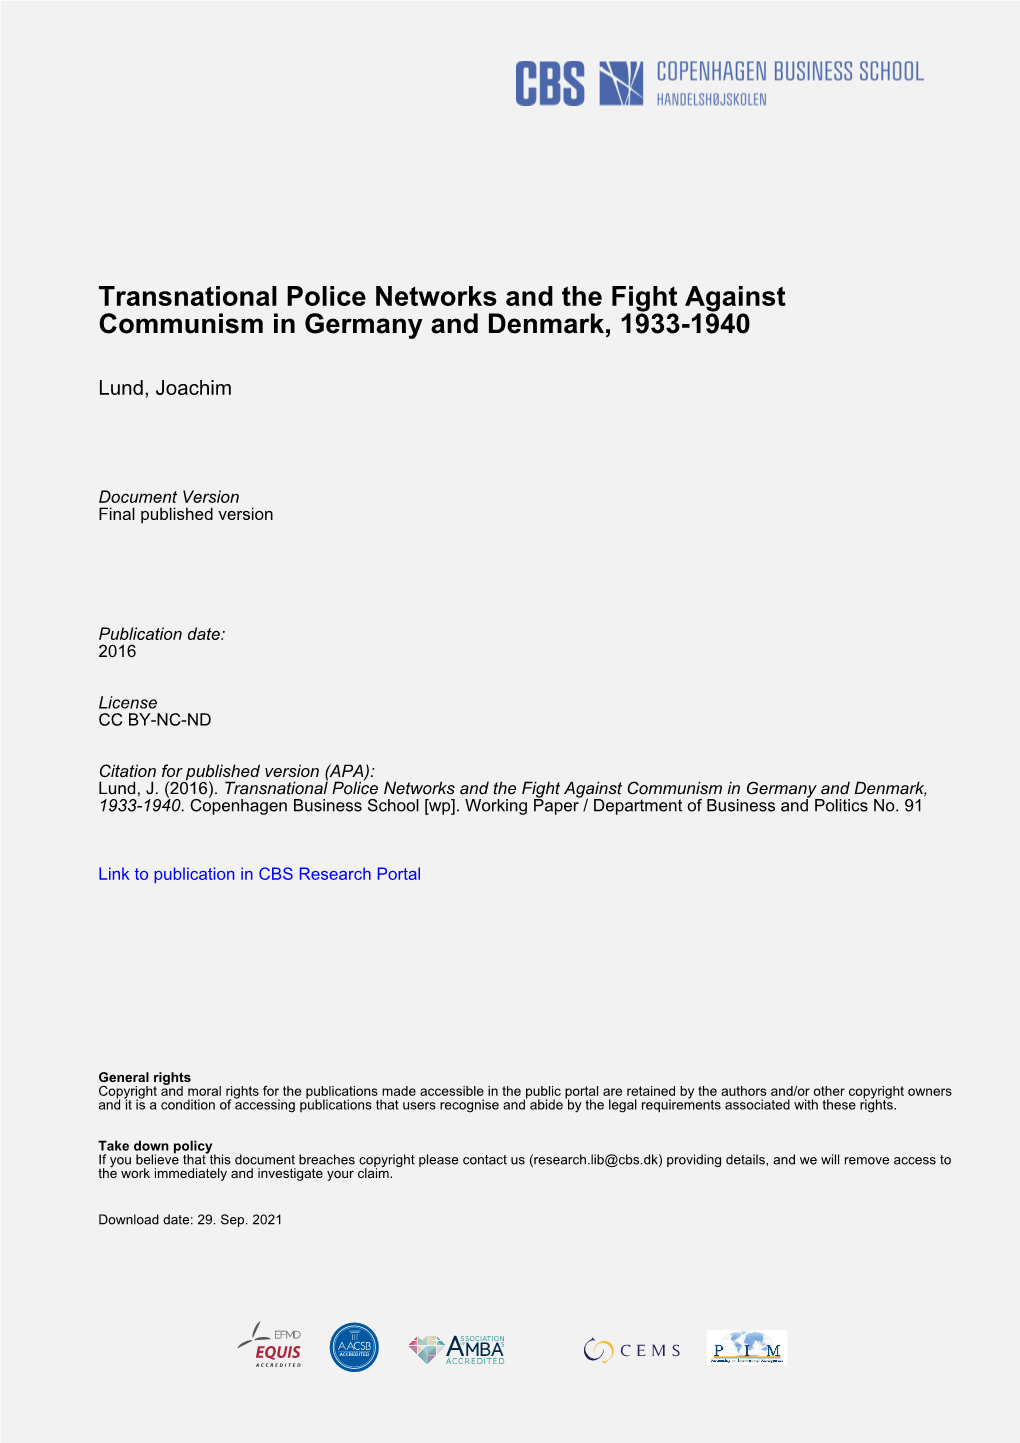 Transnational Police Networks and the Fight Against Communism in Germany and Denmark, 1933-1940